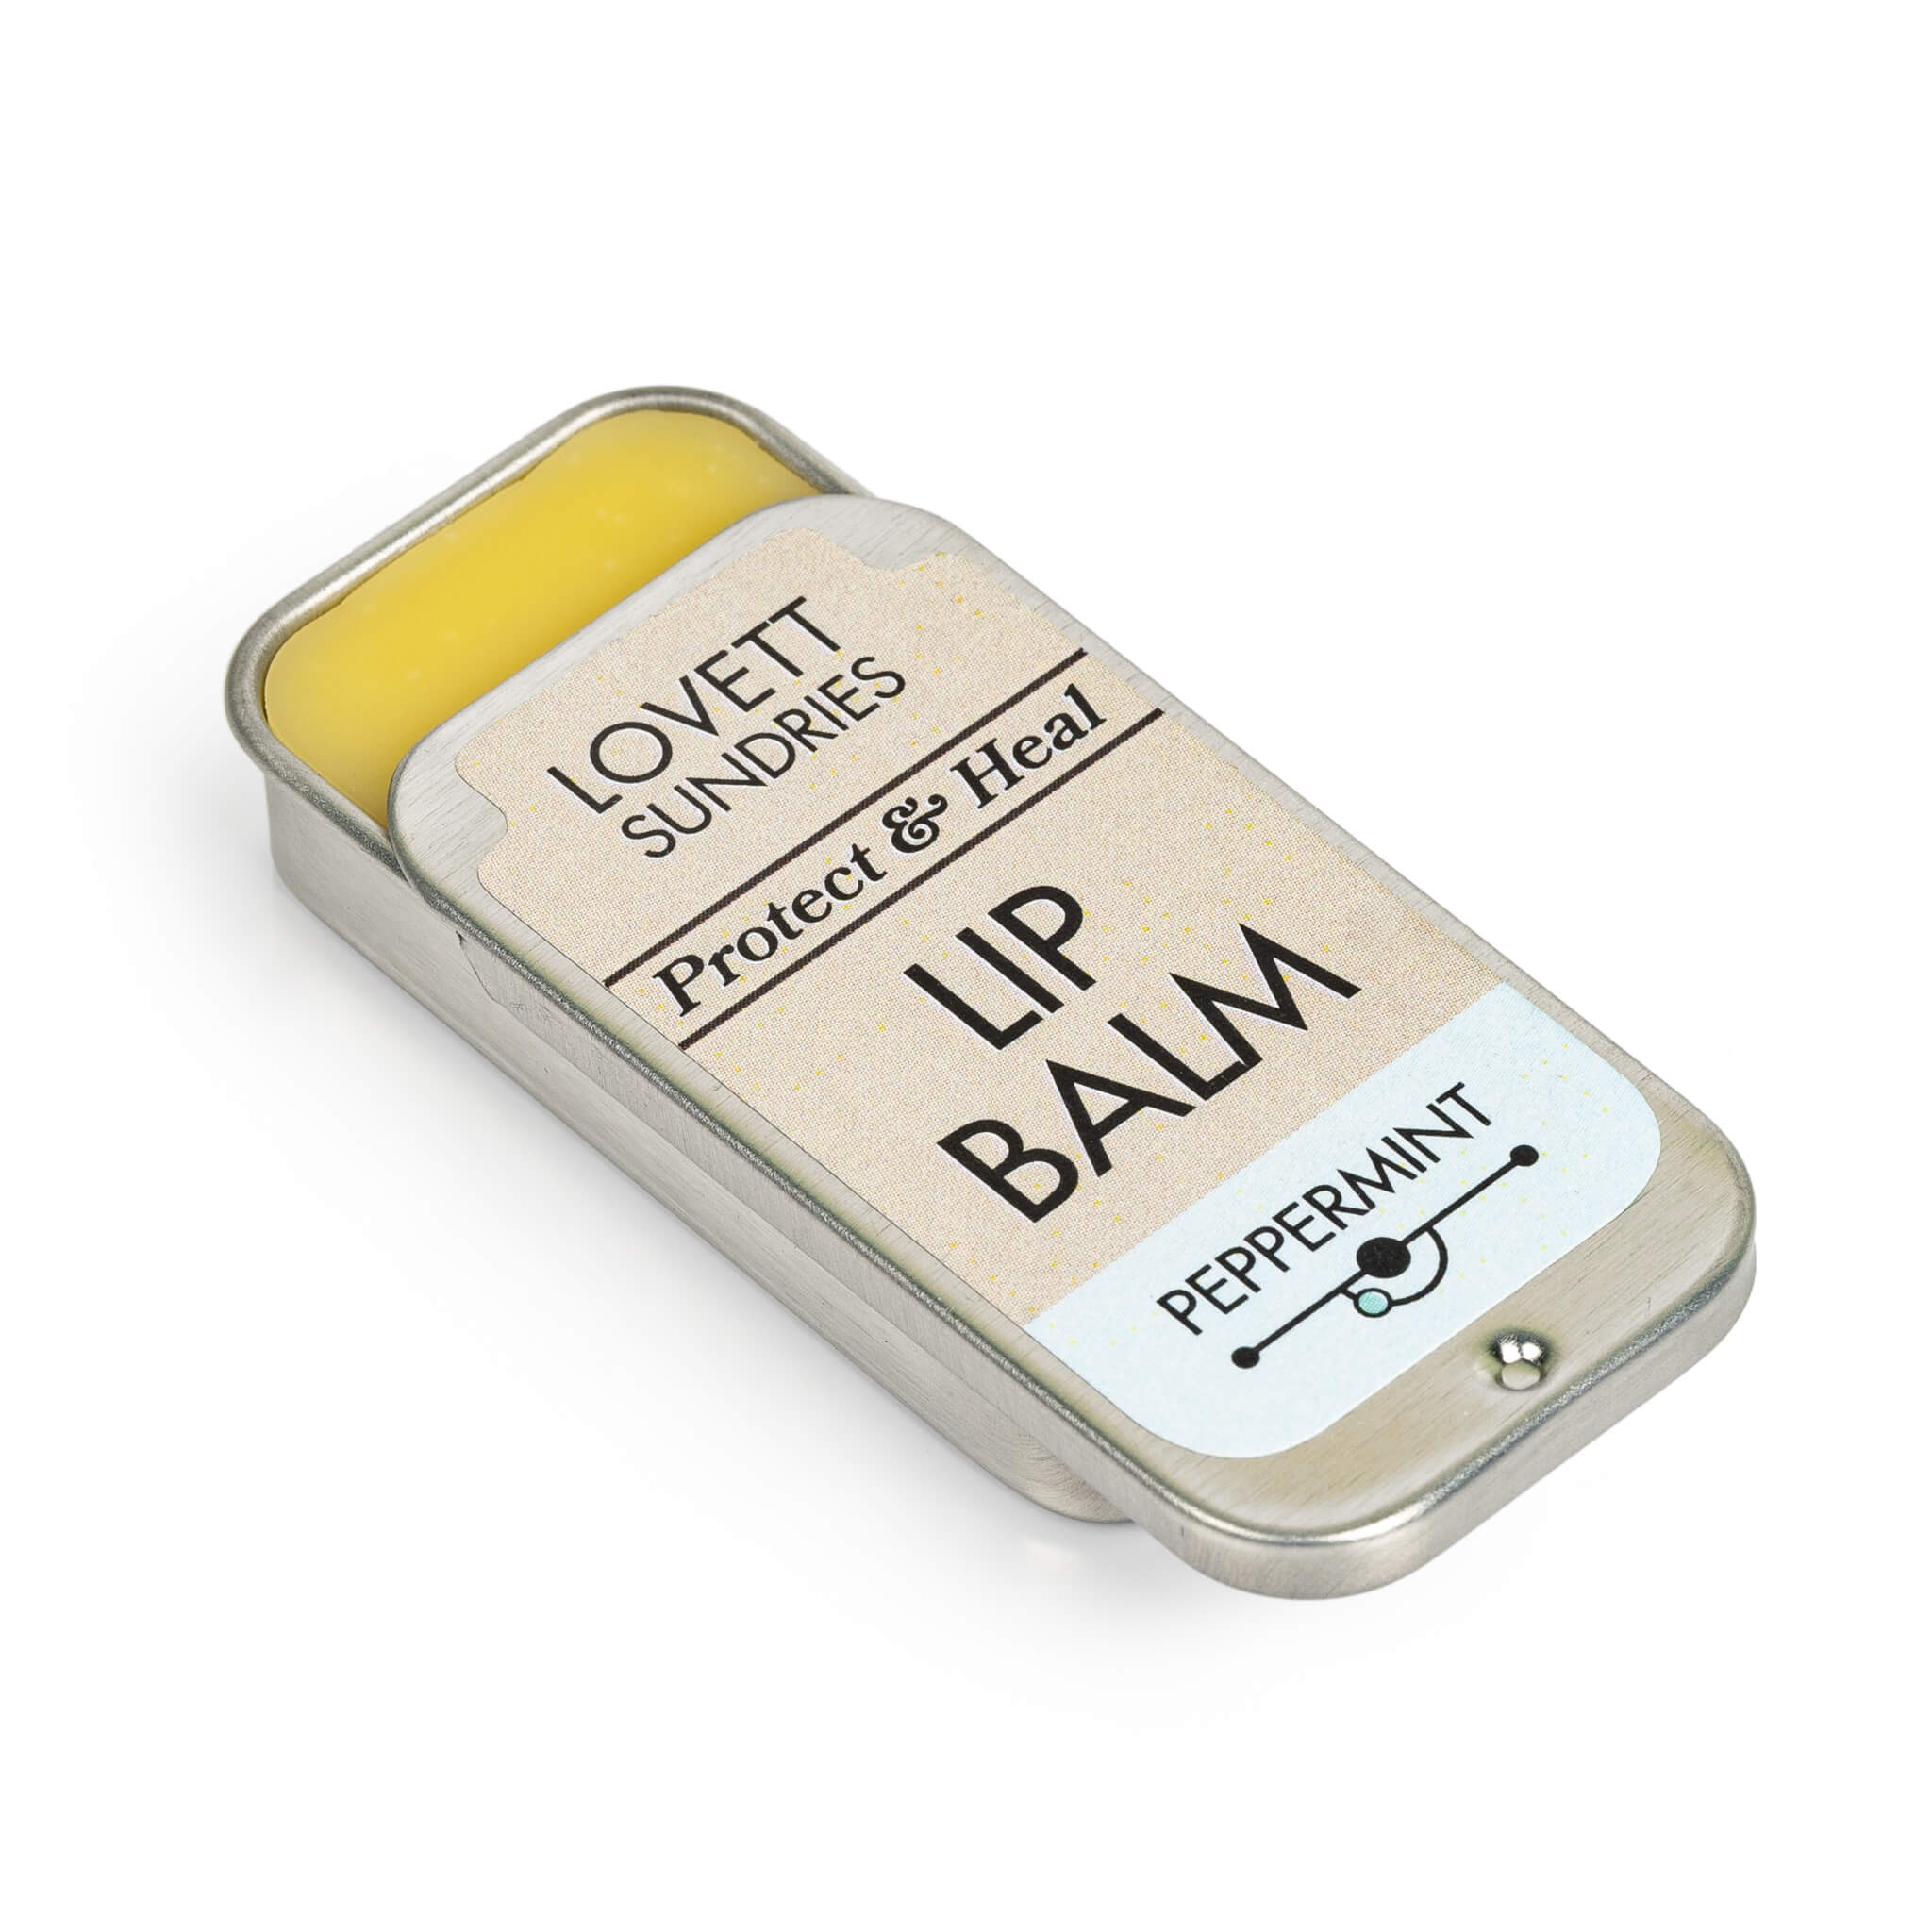 All natural peppermint scented lip balm in a recyclable tin. 